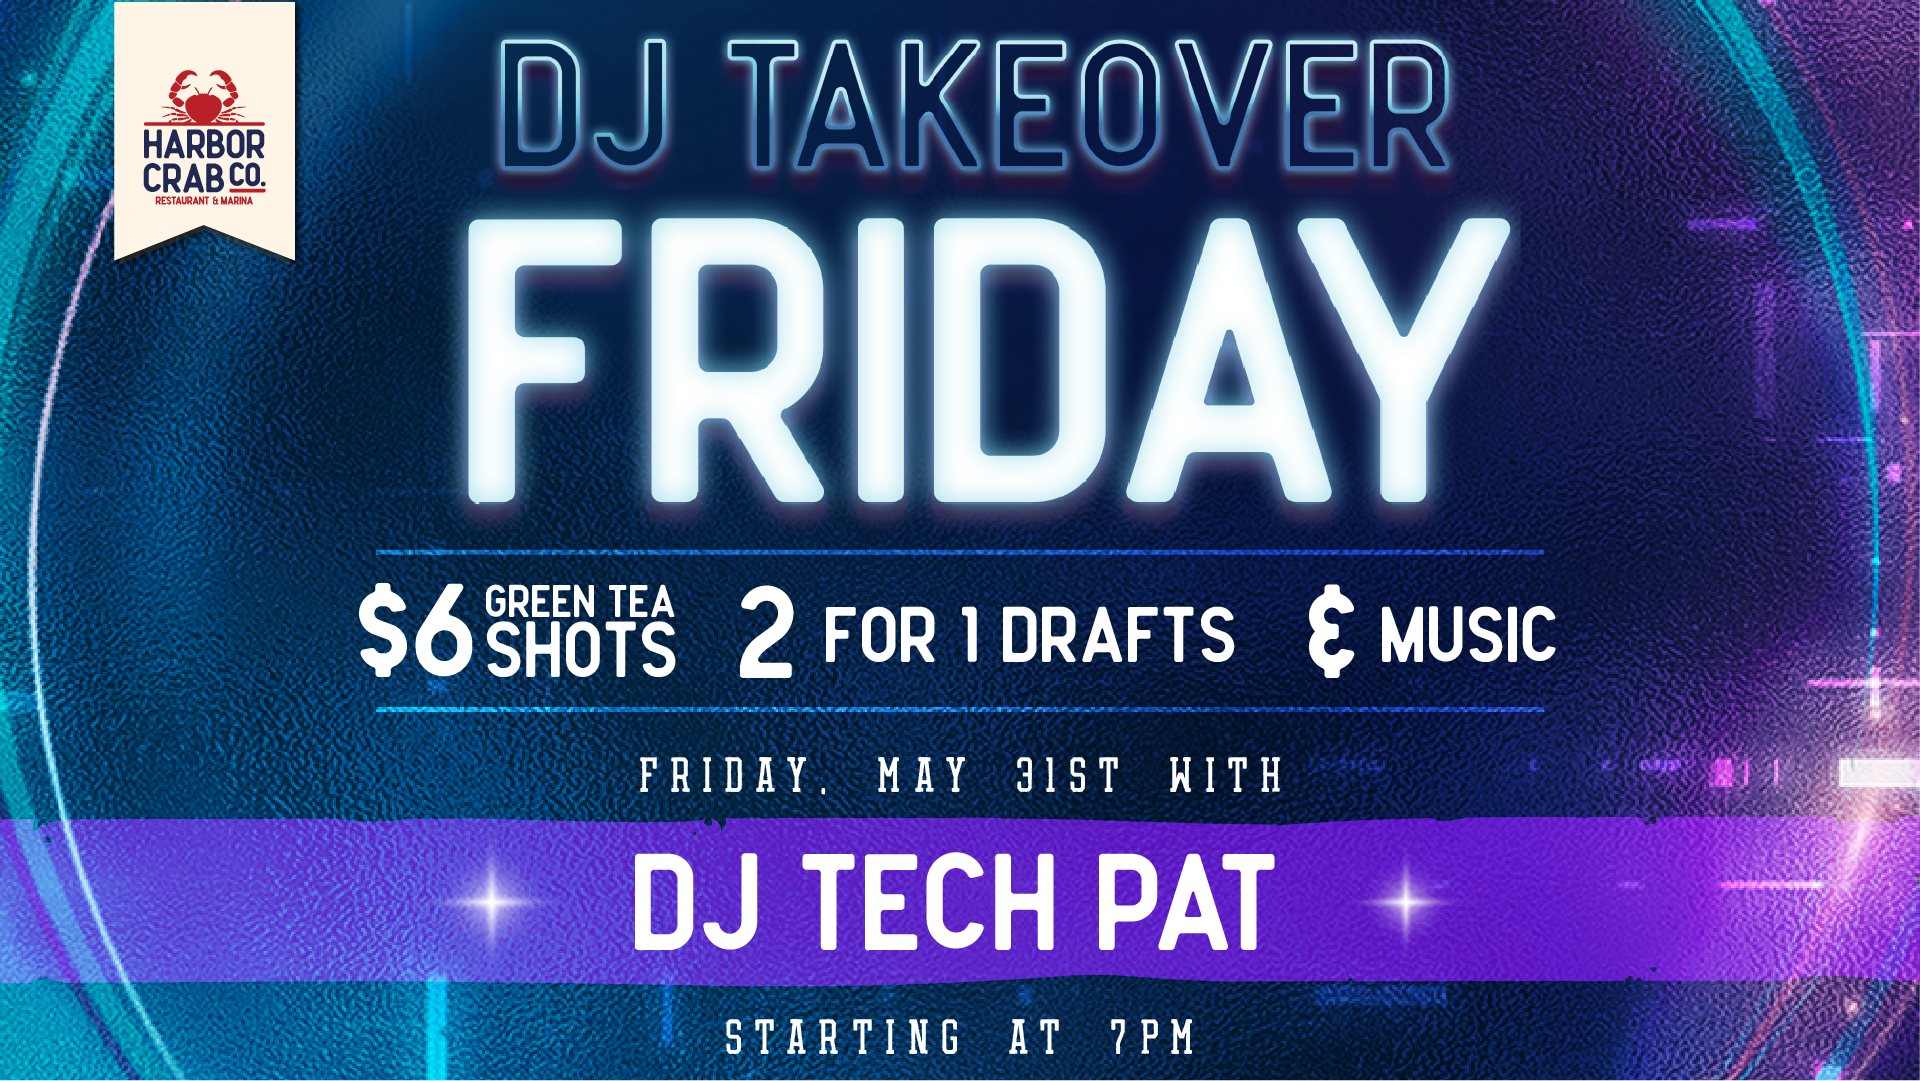 DJ Takeover with DJ Tech Pat at Harbor Crab on May 31st, starting at 7 pm. Enjoy music, drinks, and a lively atmosphere.